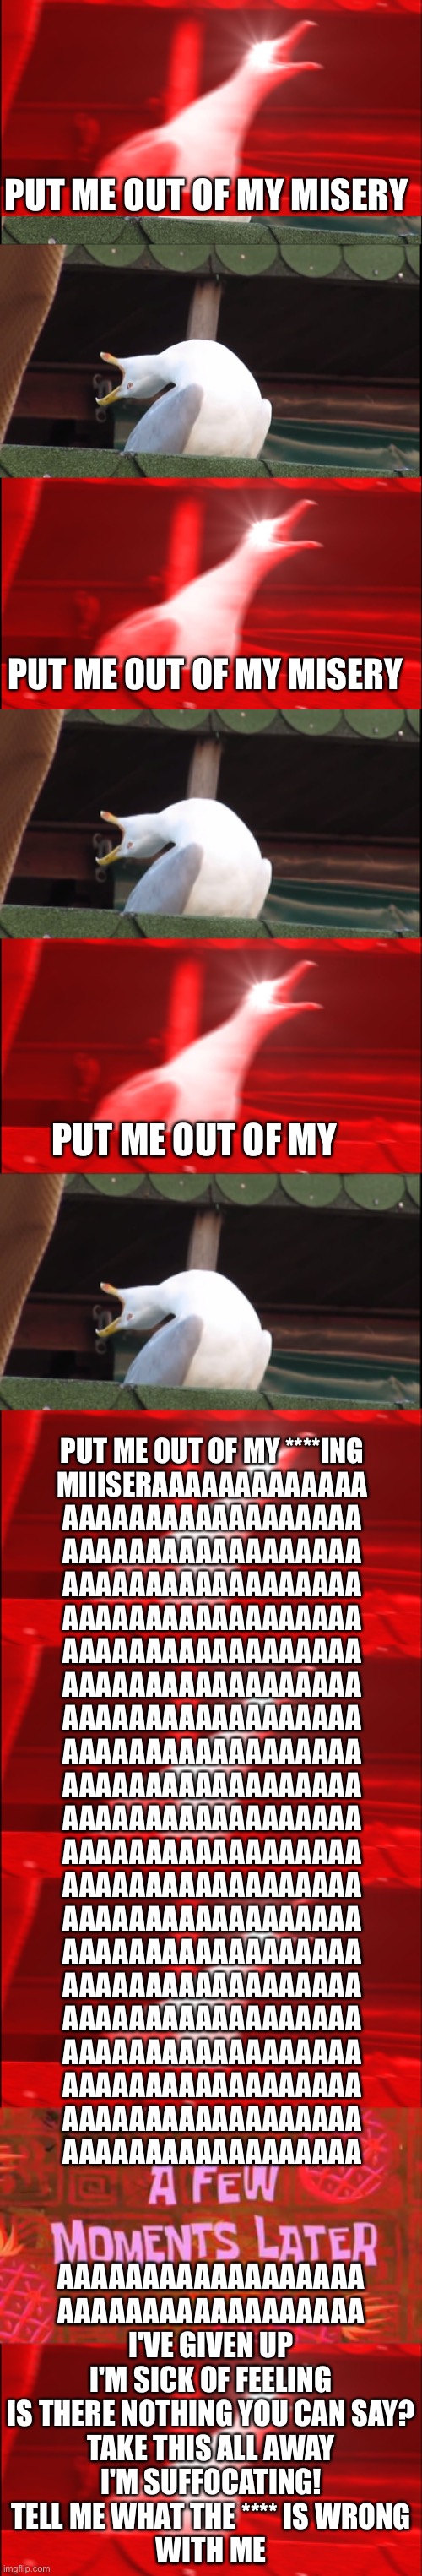 Seagull sings that one part in Given Up by Linkin Park | PUT ME OUT OF MY MISERY; PUT ME OUT OF MY MISERY; PUT ME OUT OF MY; PUT ME OUT OF MY ****ING
MIIISERAAAAAAAAAAAAA
AAAAAAAAAAAAAAAAAA
AAAAAAAAAAAAAAAAAA
AAAAAAAAAAAAAAAAAA
AAAAAAAAAAAAAAAAAA
AAAAAAAAAAAAAAAAAA
AAAAAAAAAAAAAAAAAA
AAAAAAAAAAAAAAAAAA
AAAAAAAAAAAAAAAAAA
AAAAAAAAAAAAAAAAAA
AAAAAAAAAAAAAAAAAA
AAAAAAAAAAAAAAAAAA
AAAAAAAAAAAAAAAAAA
AAAAAAAAAAAAAAAAAA
AAAAAAAAAAAAAAAAAA
AAAAAAAAAAAAAAAAAA
AAAAAAAAAAAAAAAAAA
AAAAAAAAAAAAAAAAAA
AAAAAAAAAAAAAAAAAA
AAAAAAAAAAAAAAAAAA
AAAAAAAAAAAAAAAAAA; AAAAAAAAAAAAAAAAAA
AAAAAAAAAAAAAAAAAA

I'VE GIVEN UP
I'M SICK OF FEELING
IS THERE NOTHING YOU CAN SAY?
TAKE THIS ALL AWAY
I'M SUFFOCATING!
TELL ME WHAT THE **** IS WRONG
WITH ME | image tagged in memes,inhaling seagull,a few moments later,linkin park,chester bennington,scream | made w/ Imgflip meme maker